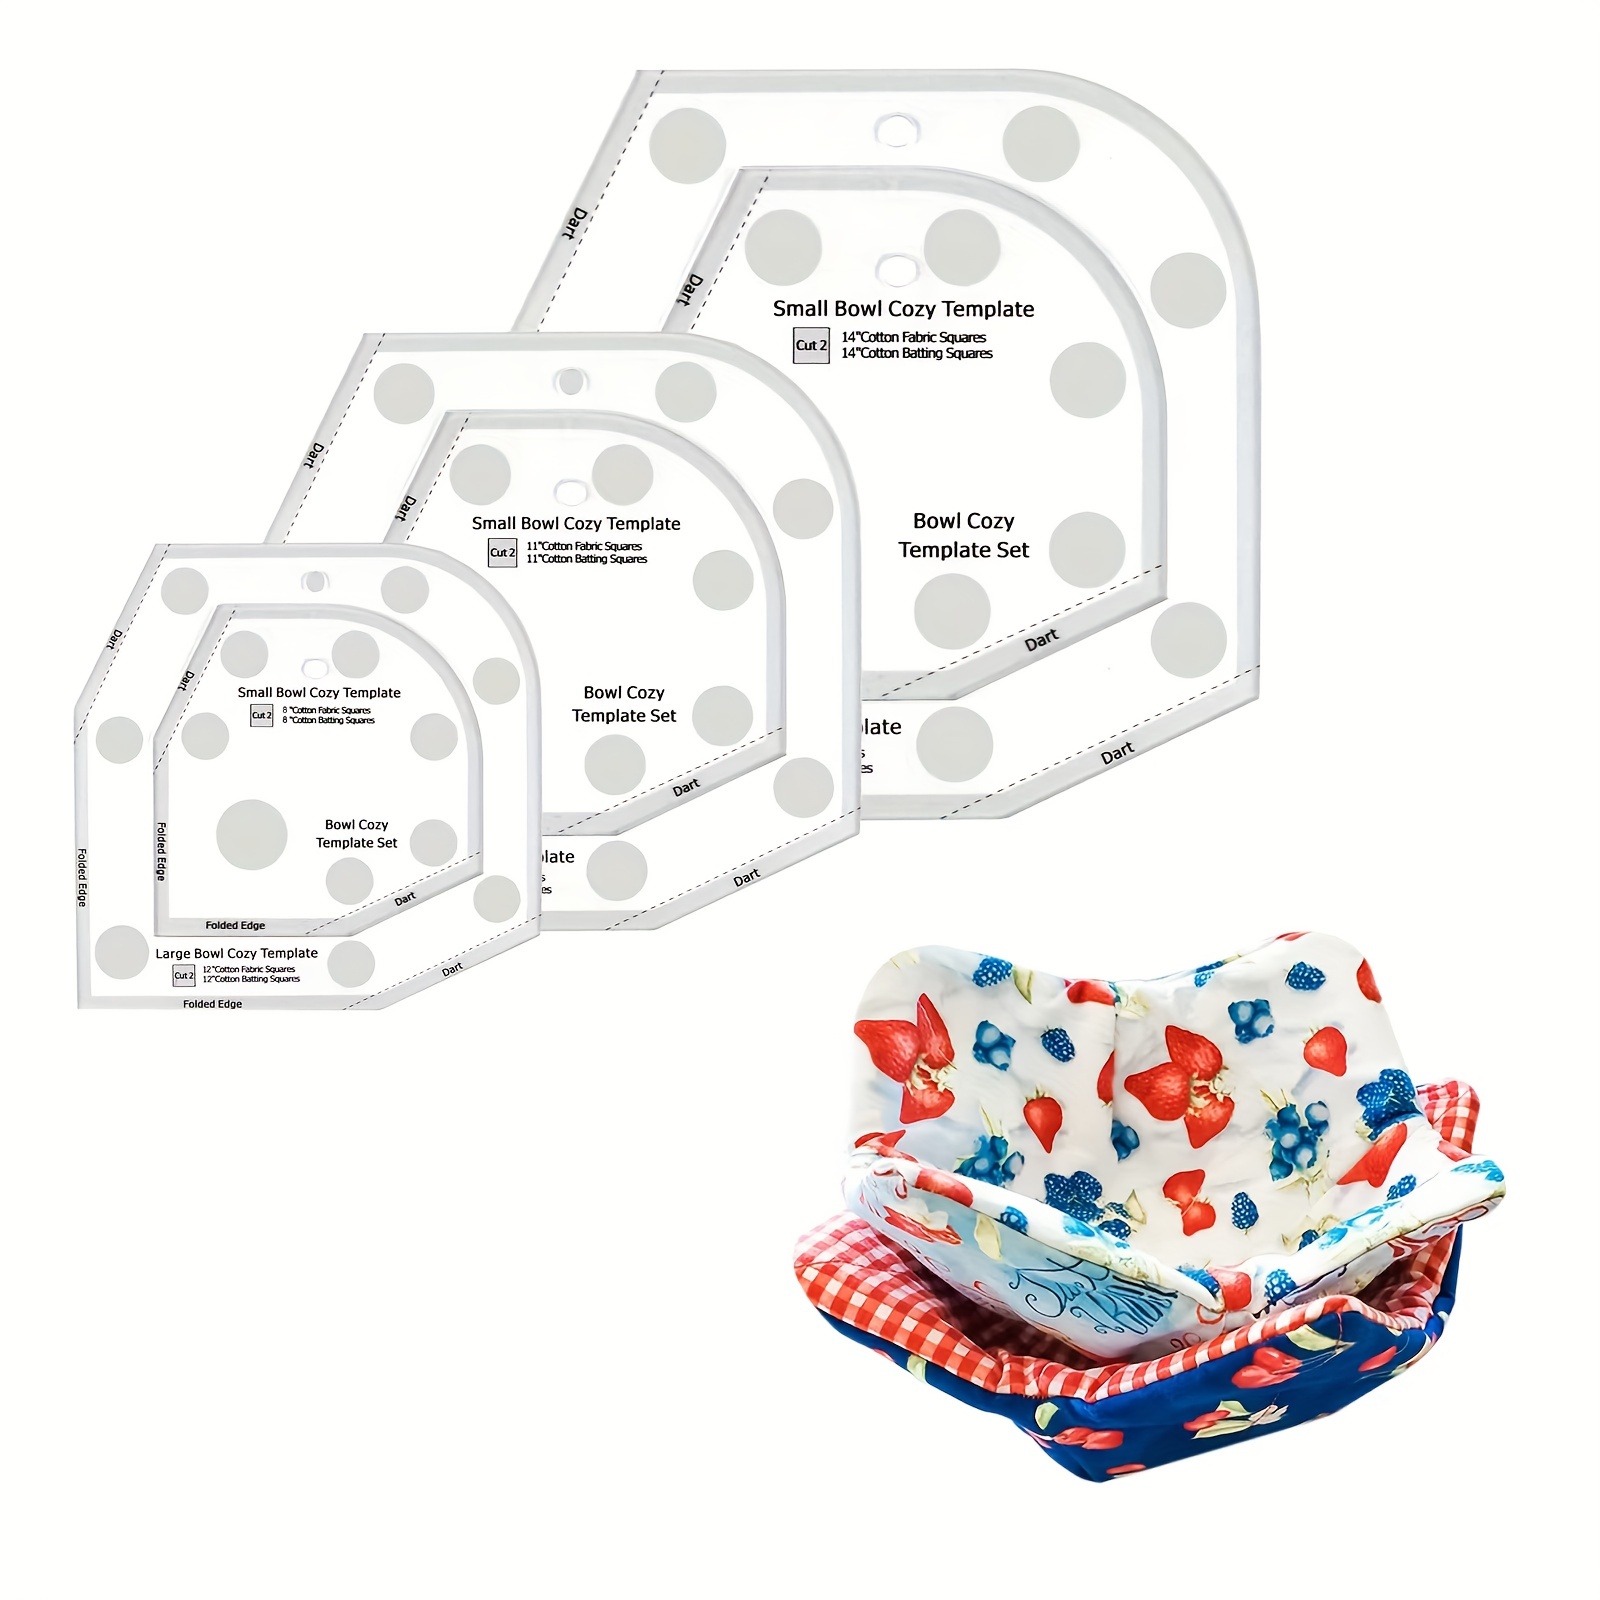 Bowl Cozy Template Acrylic: 3PCS 8 10 12 Inch Bowl Wrap Sewing Pattern  Template 